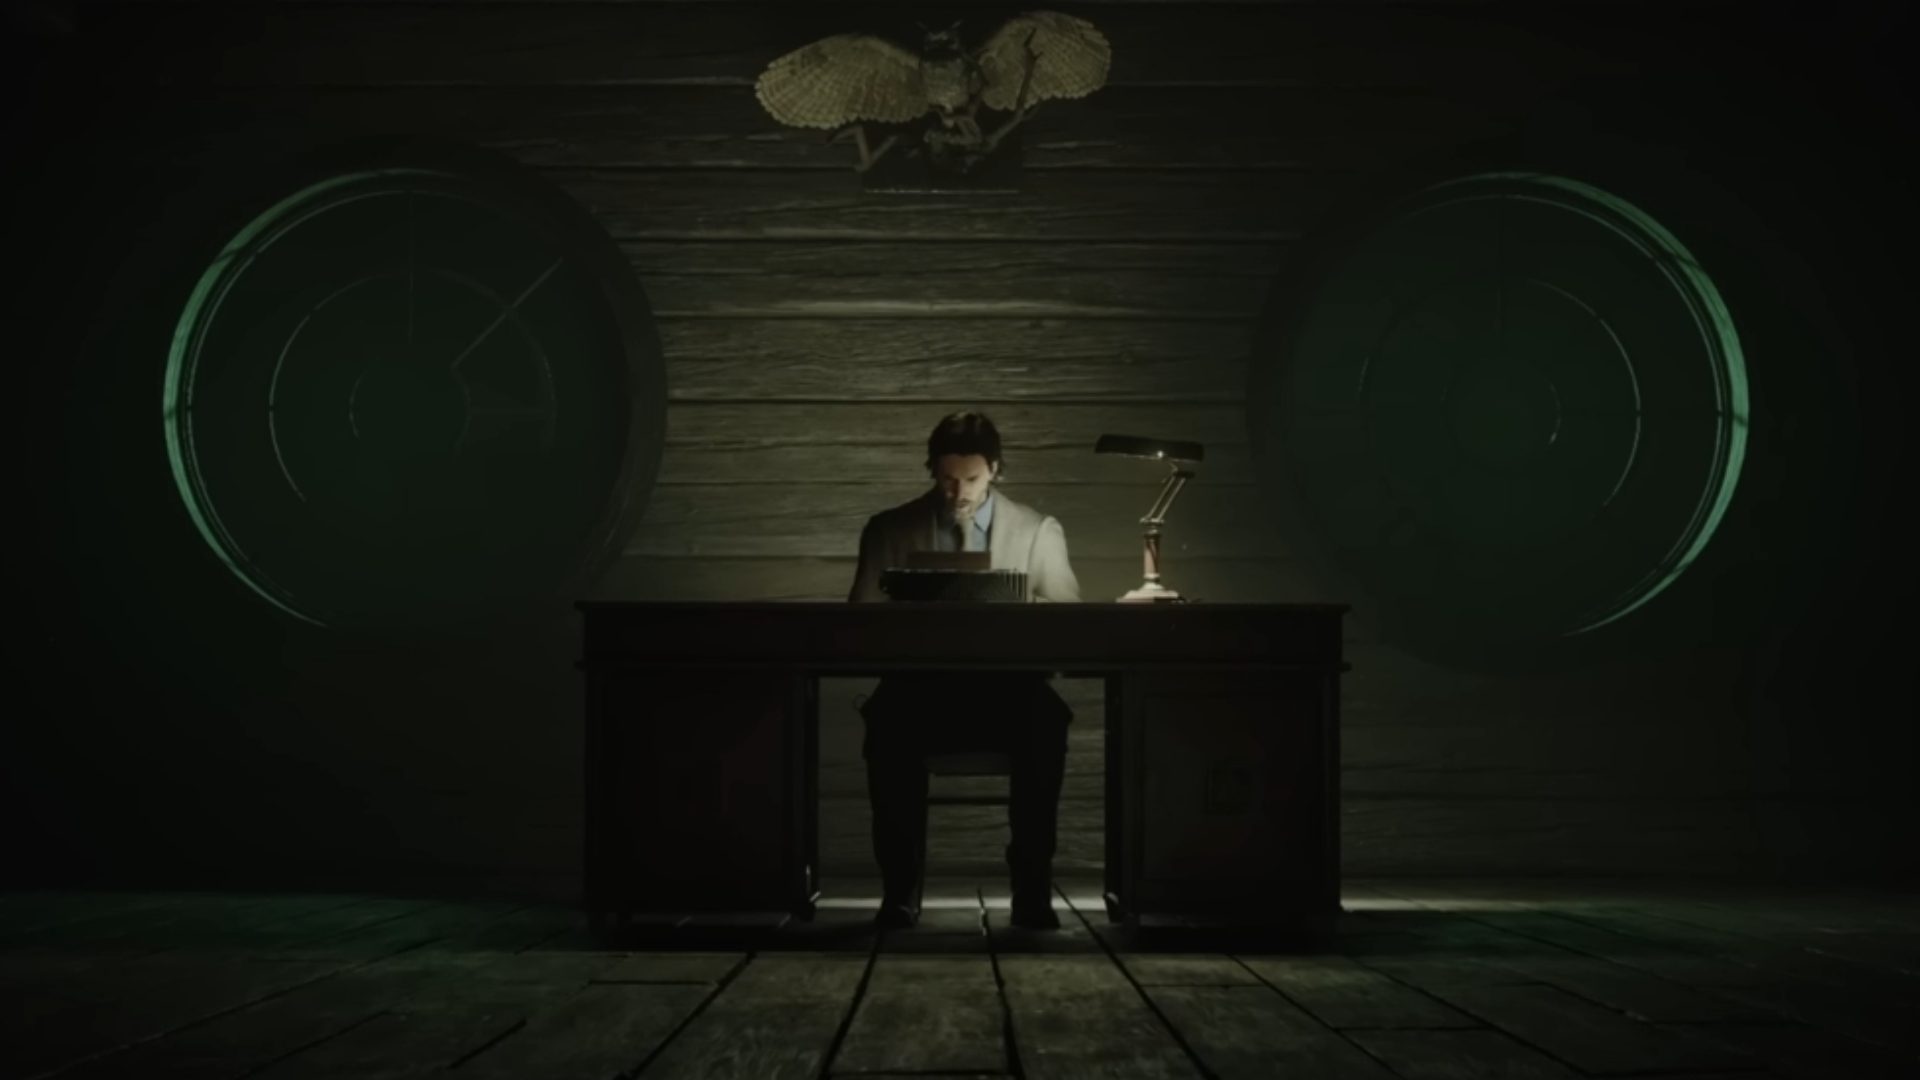 Alan Wake 2: Release Date, Differences From The Original, DLC